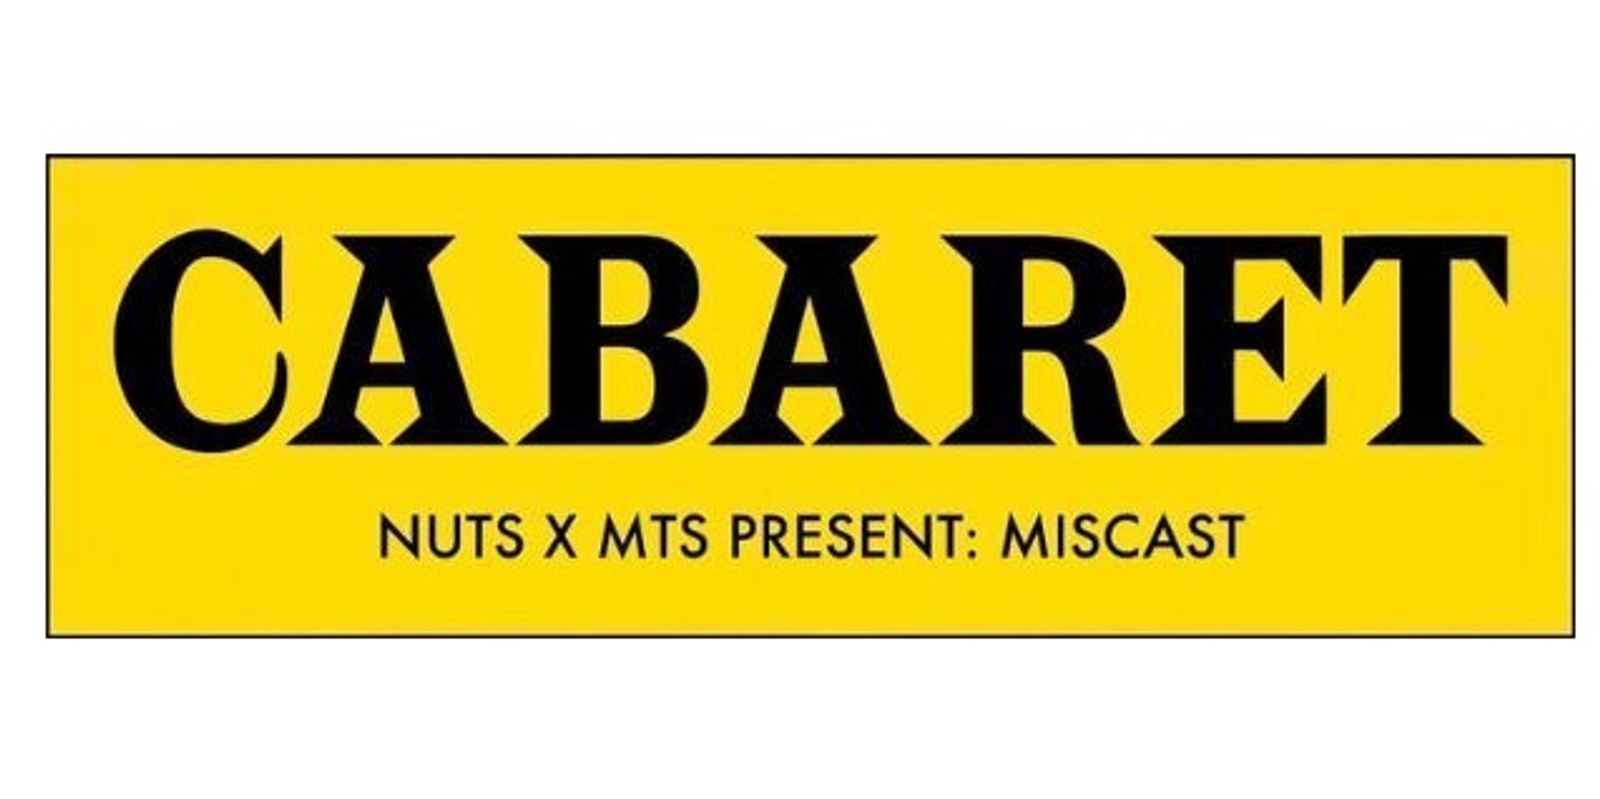 NUTS x MTS Cabaret: Miscast